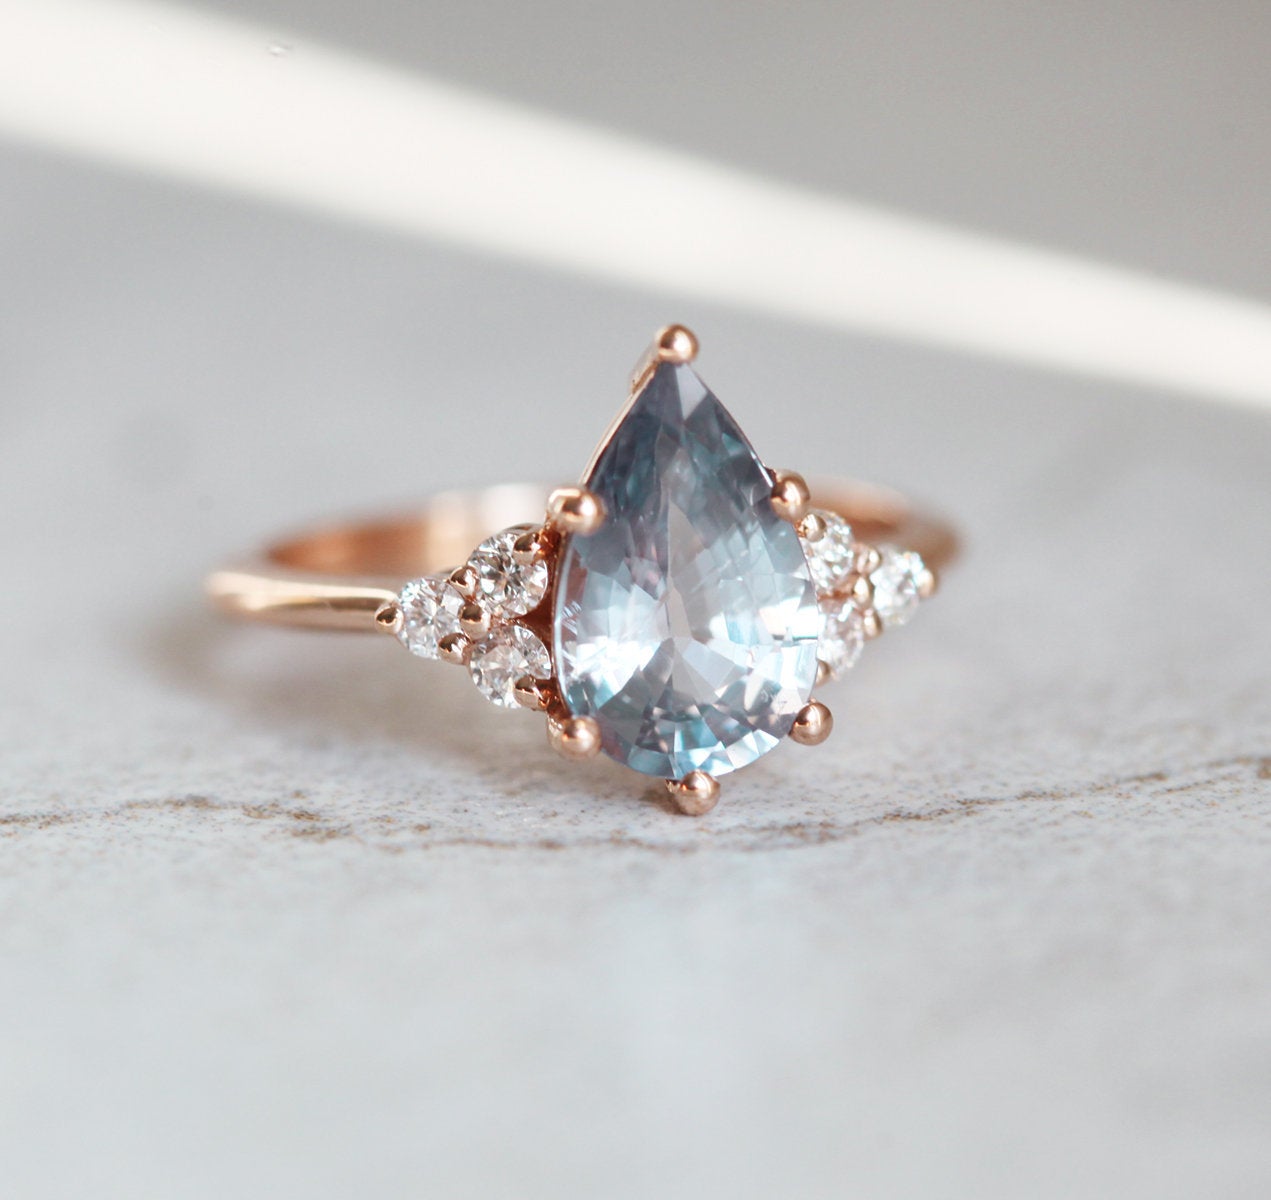 Pear-shaped blue sapphire ring with side diamonds